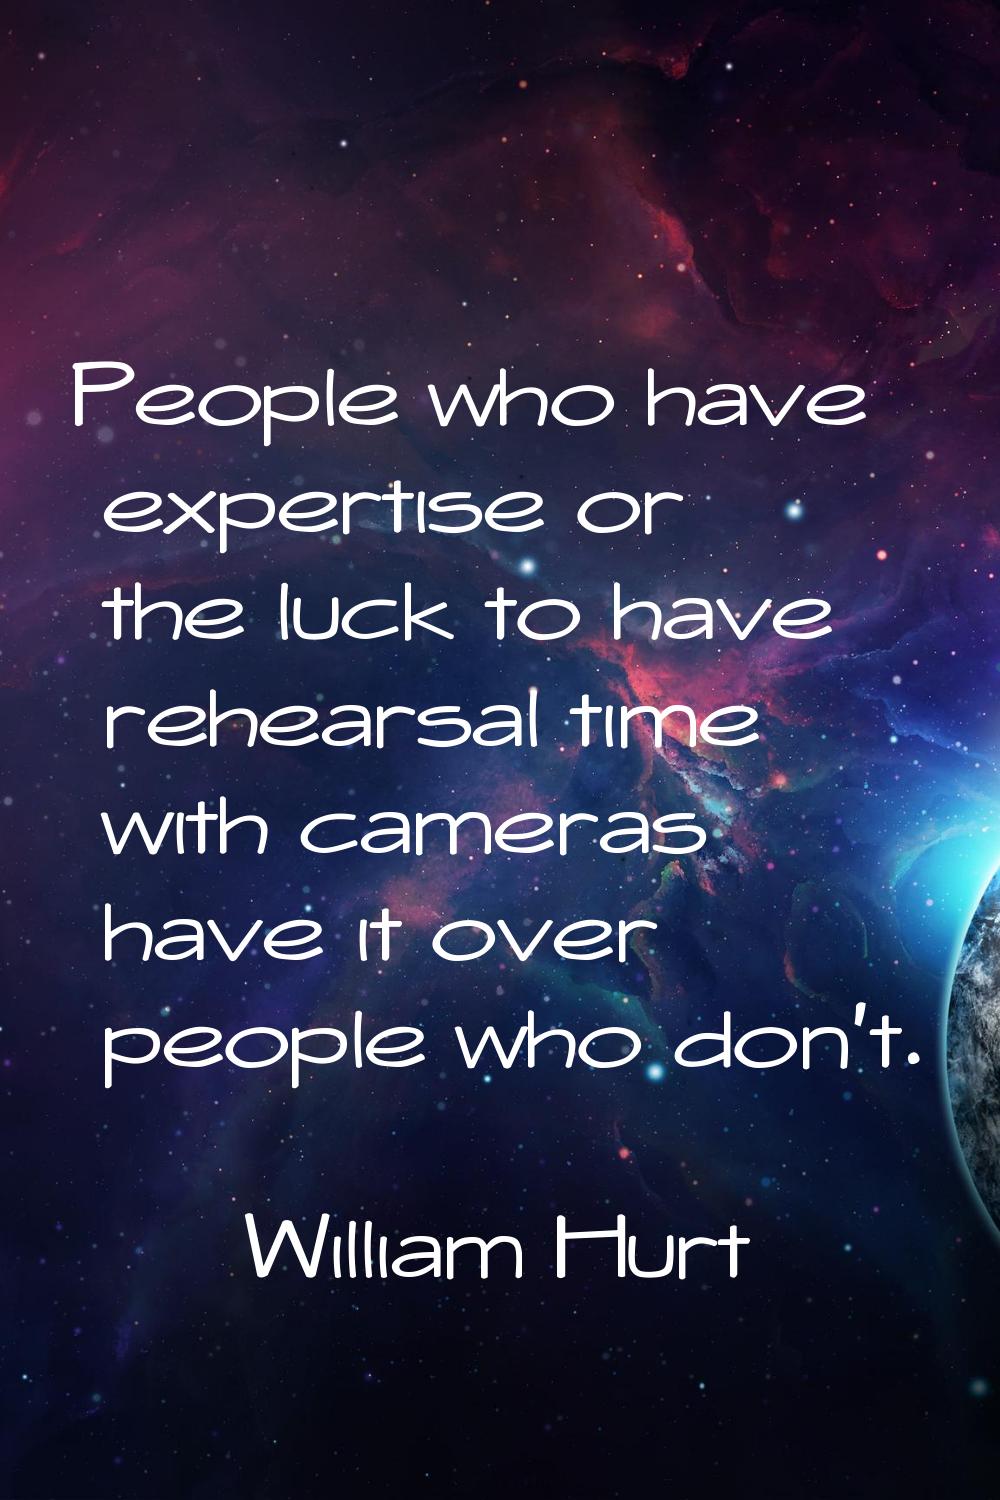 People who have expertise or the luck to have rehearsal time with cameras have it over people who d